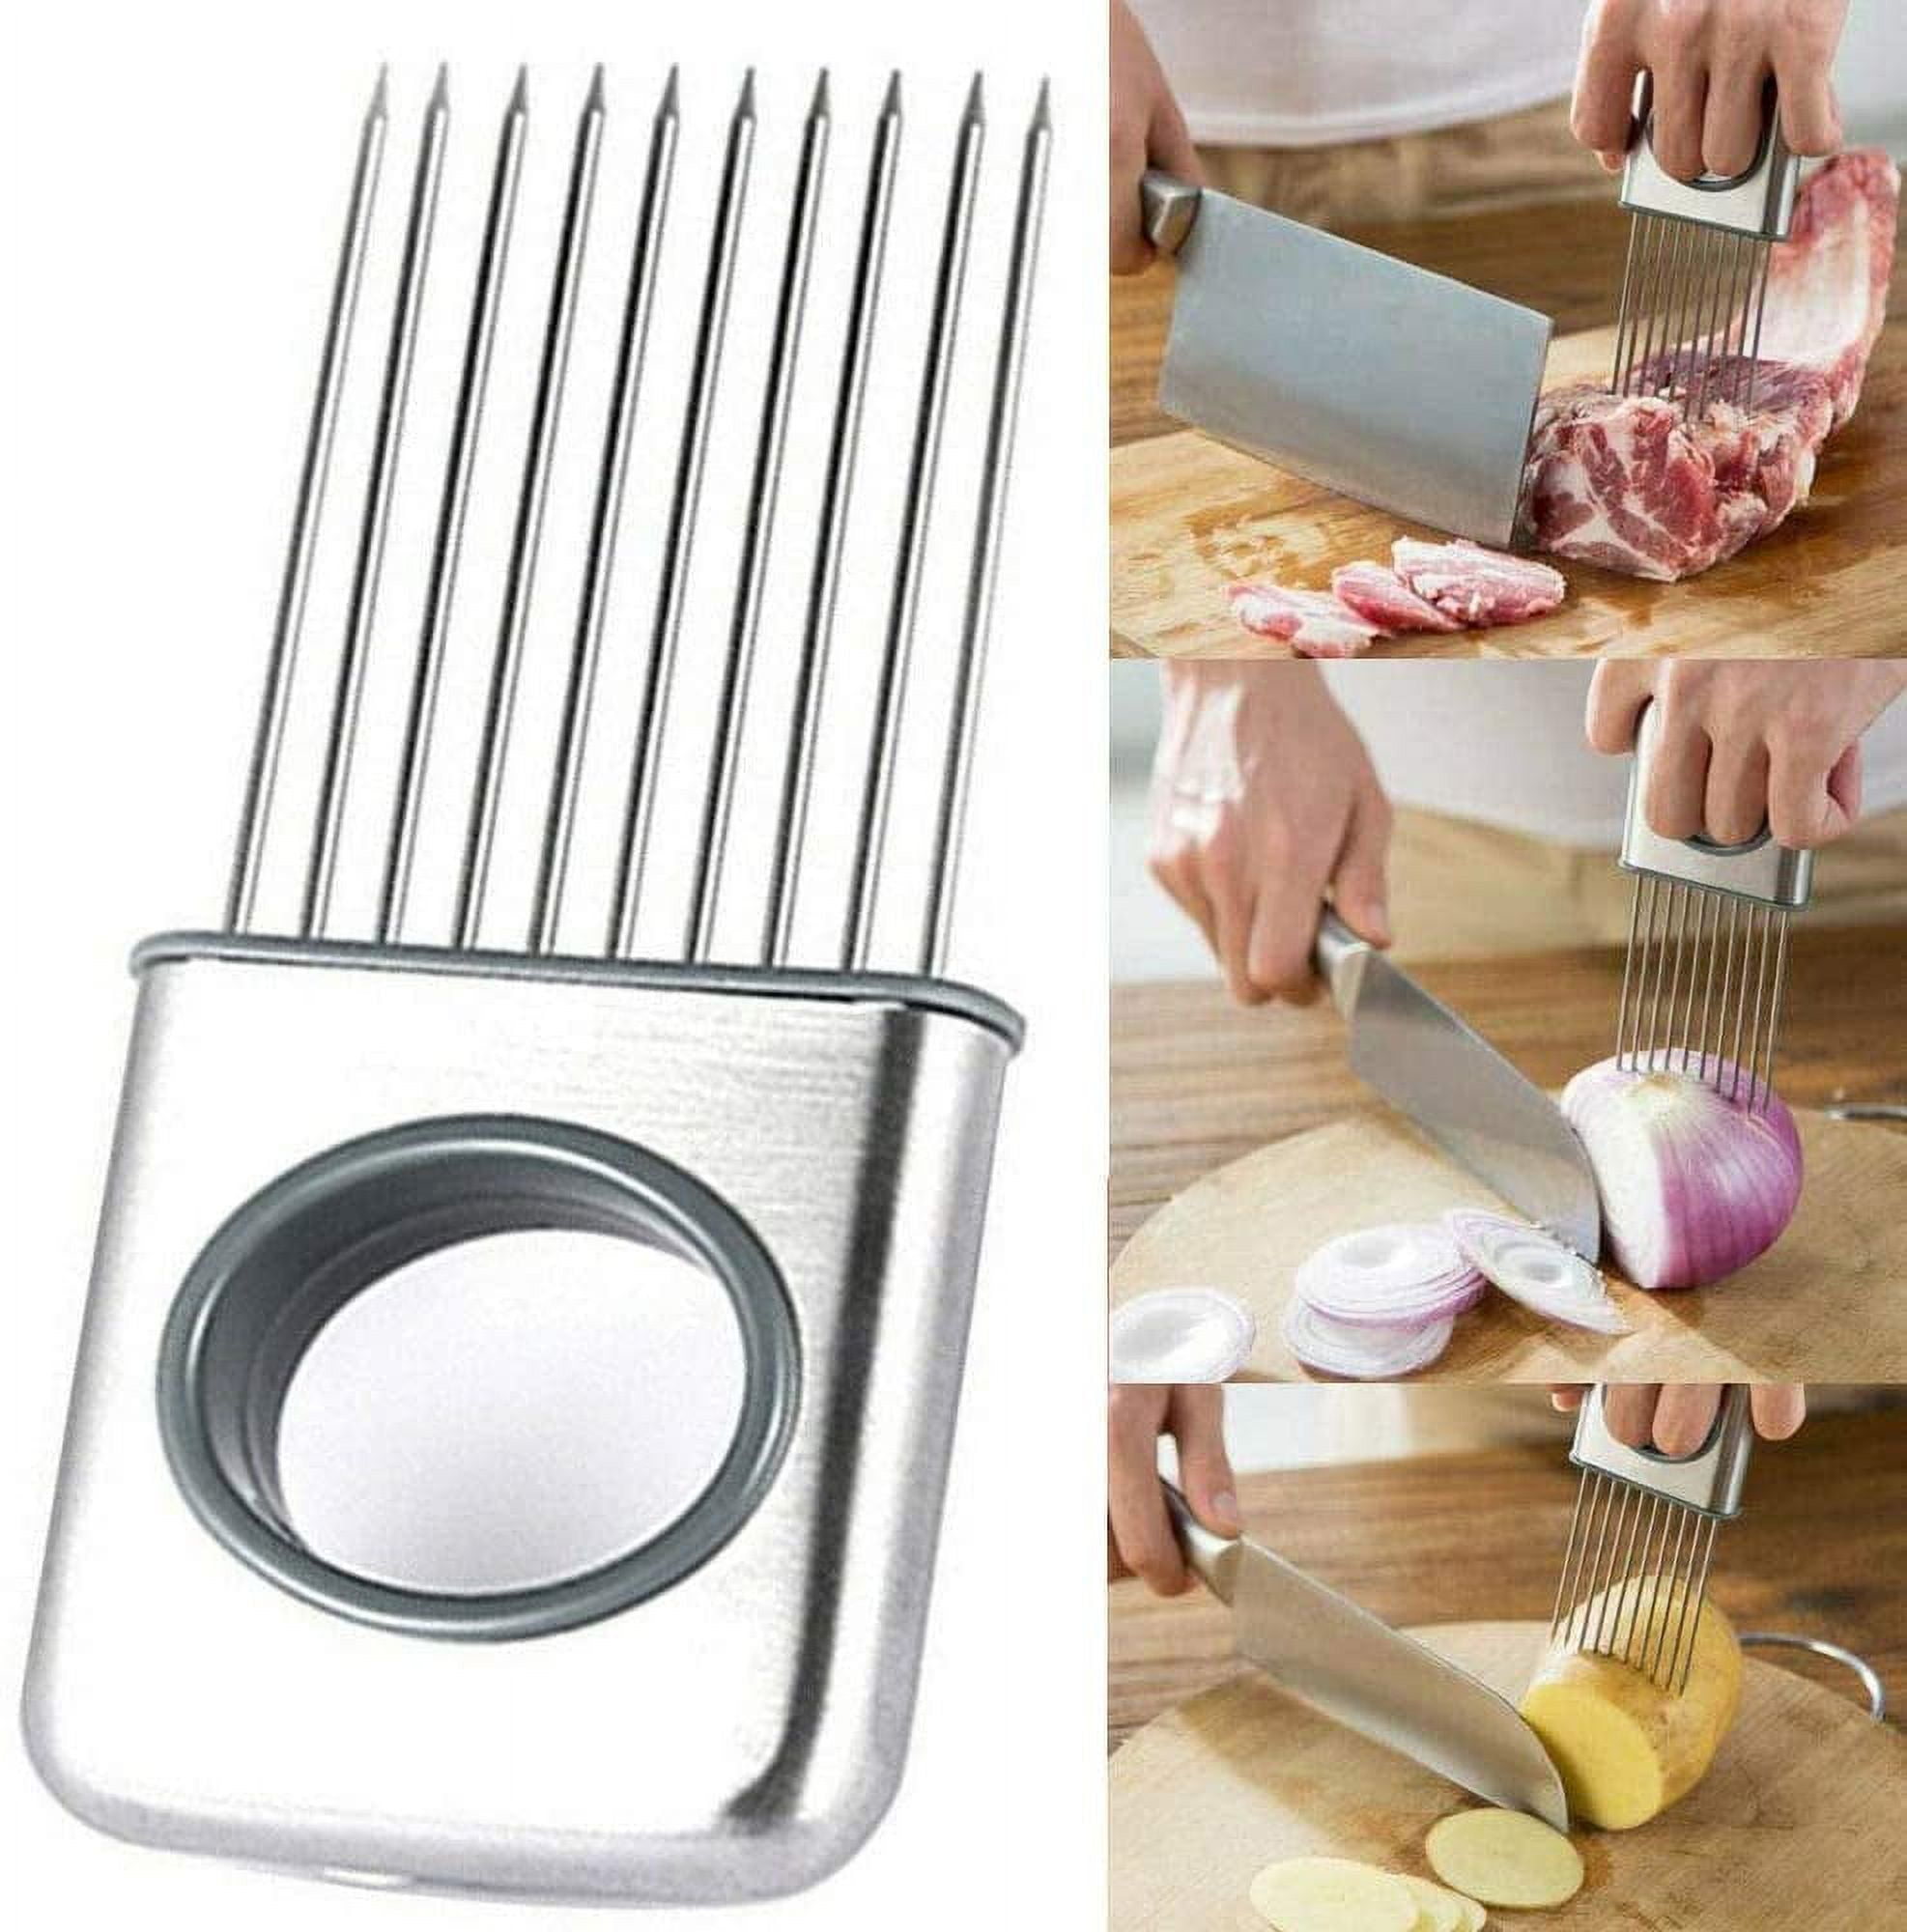 Jeashchat Butter Cutter Clearance, One Click Butter Slicer, Cheese Splitter, Butter Dispenser, Butter Slicing Tool for Making Bread Cakes Cookies